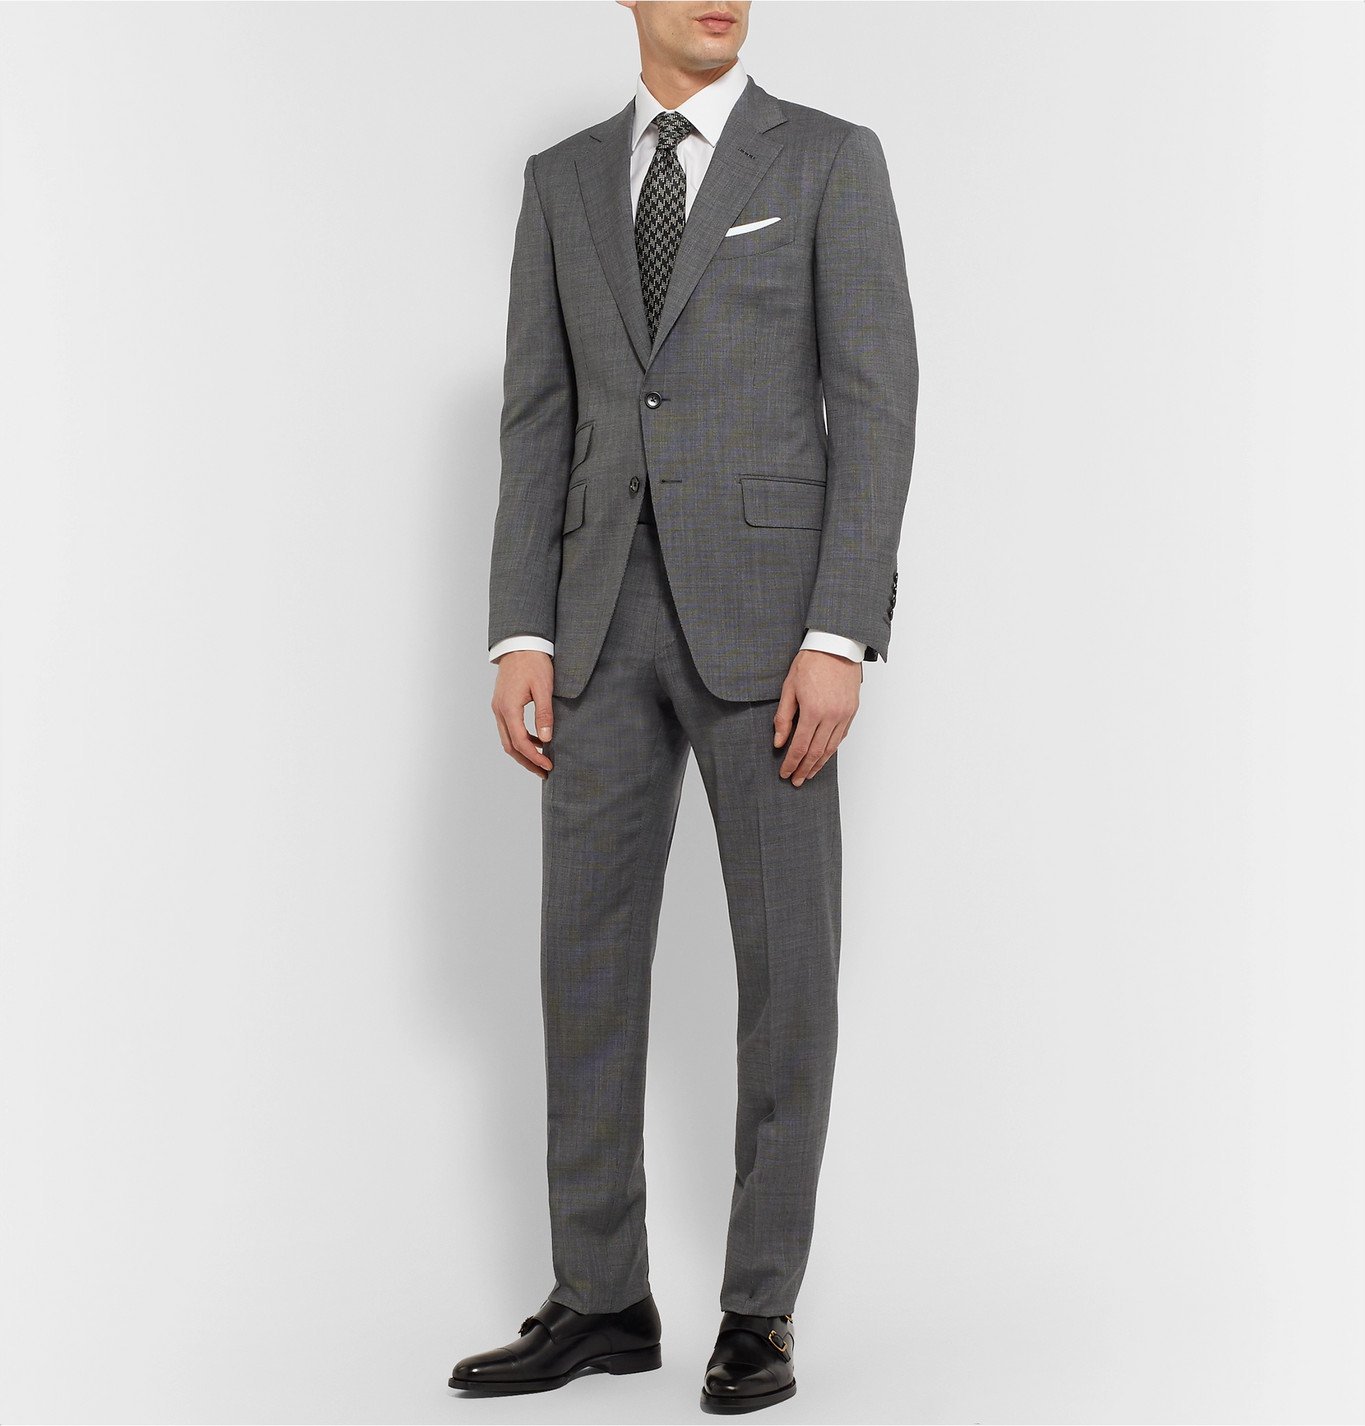 TOM FORD - O'Connor Slim Fit Wool-Blend Suit Jacket - Gray TOM FORD